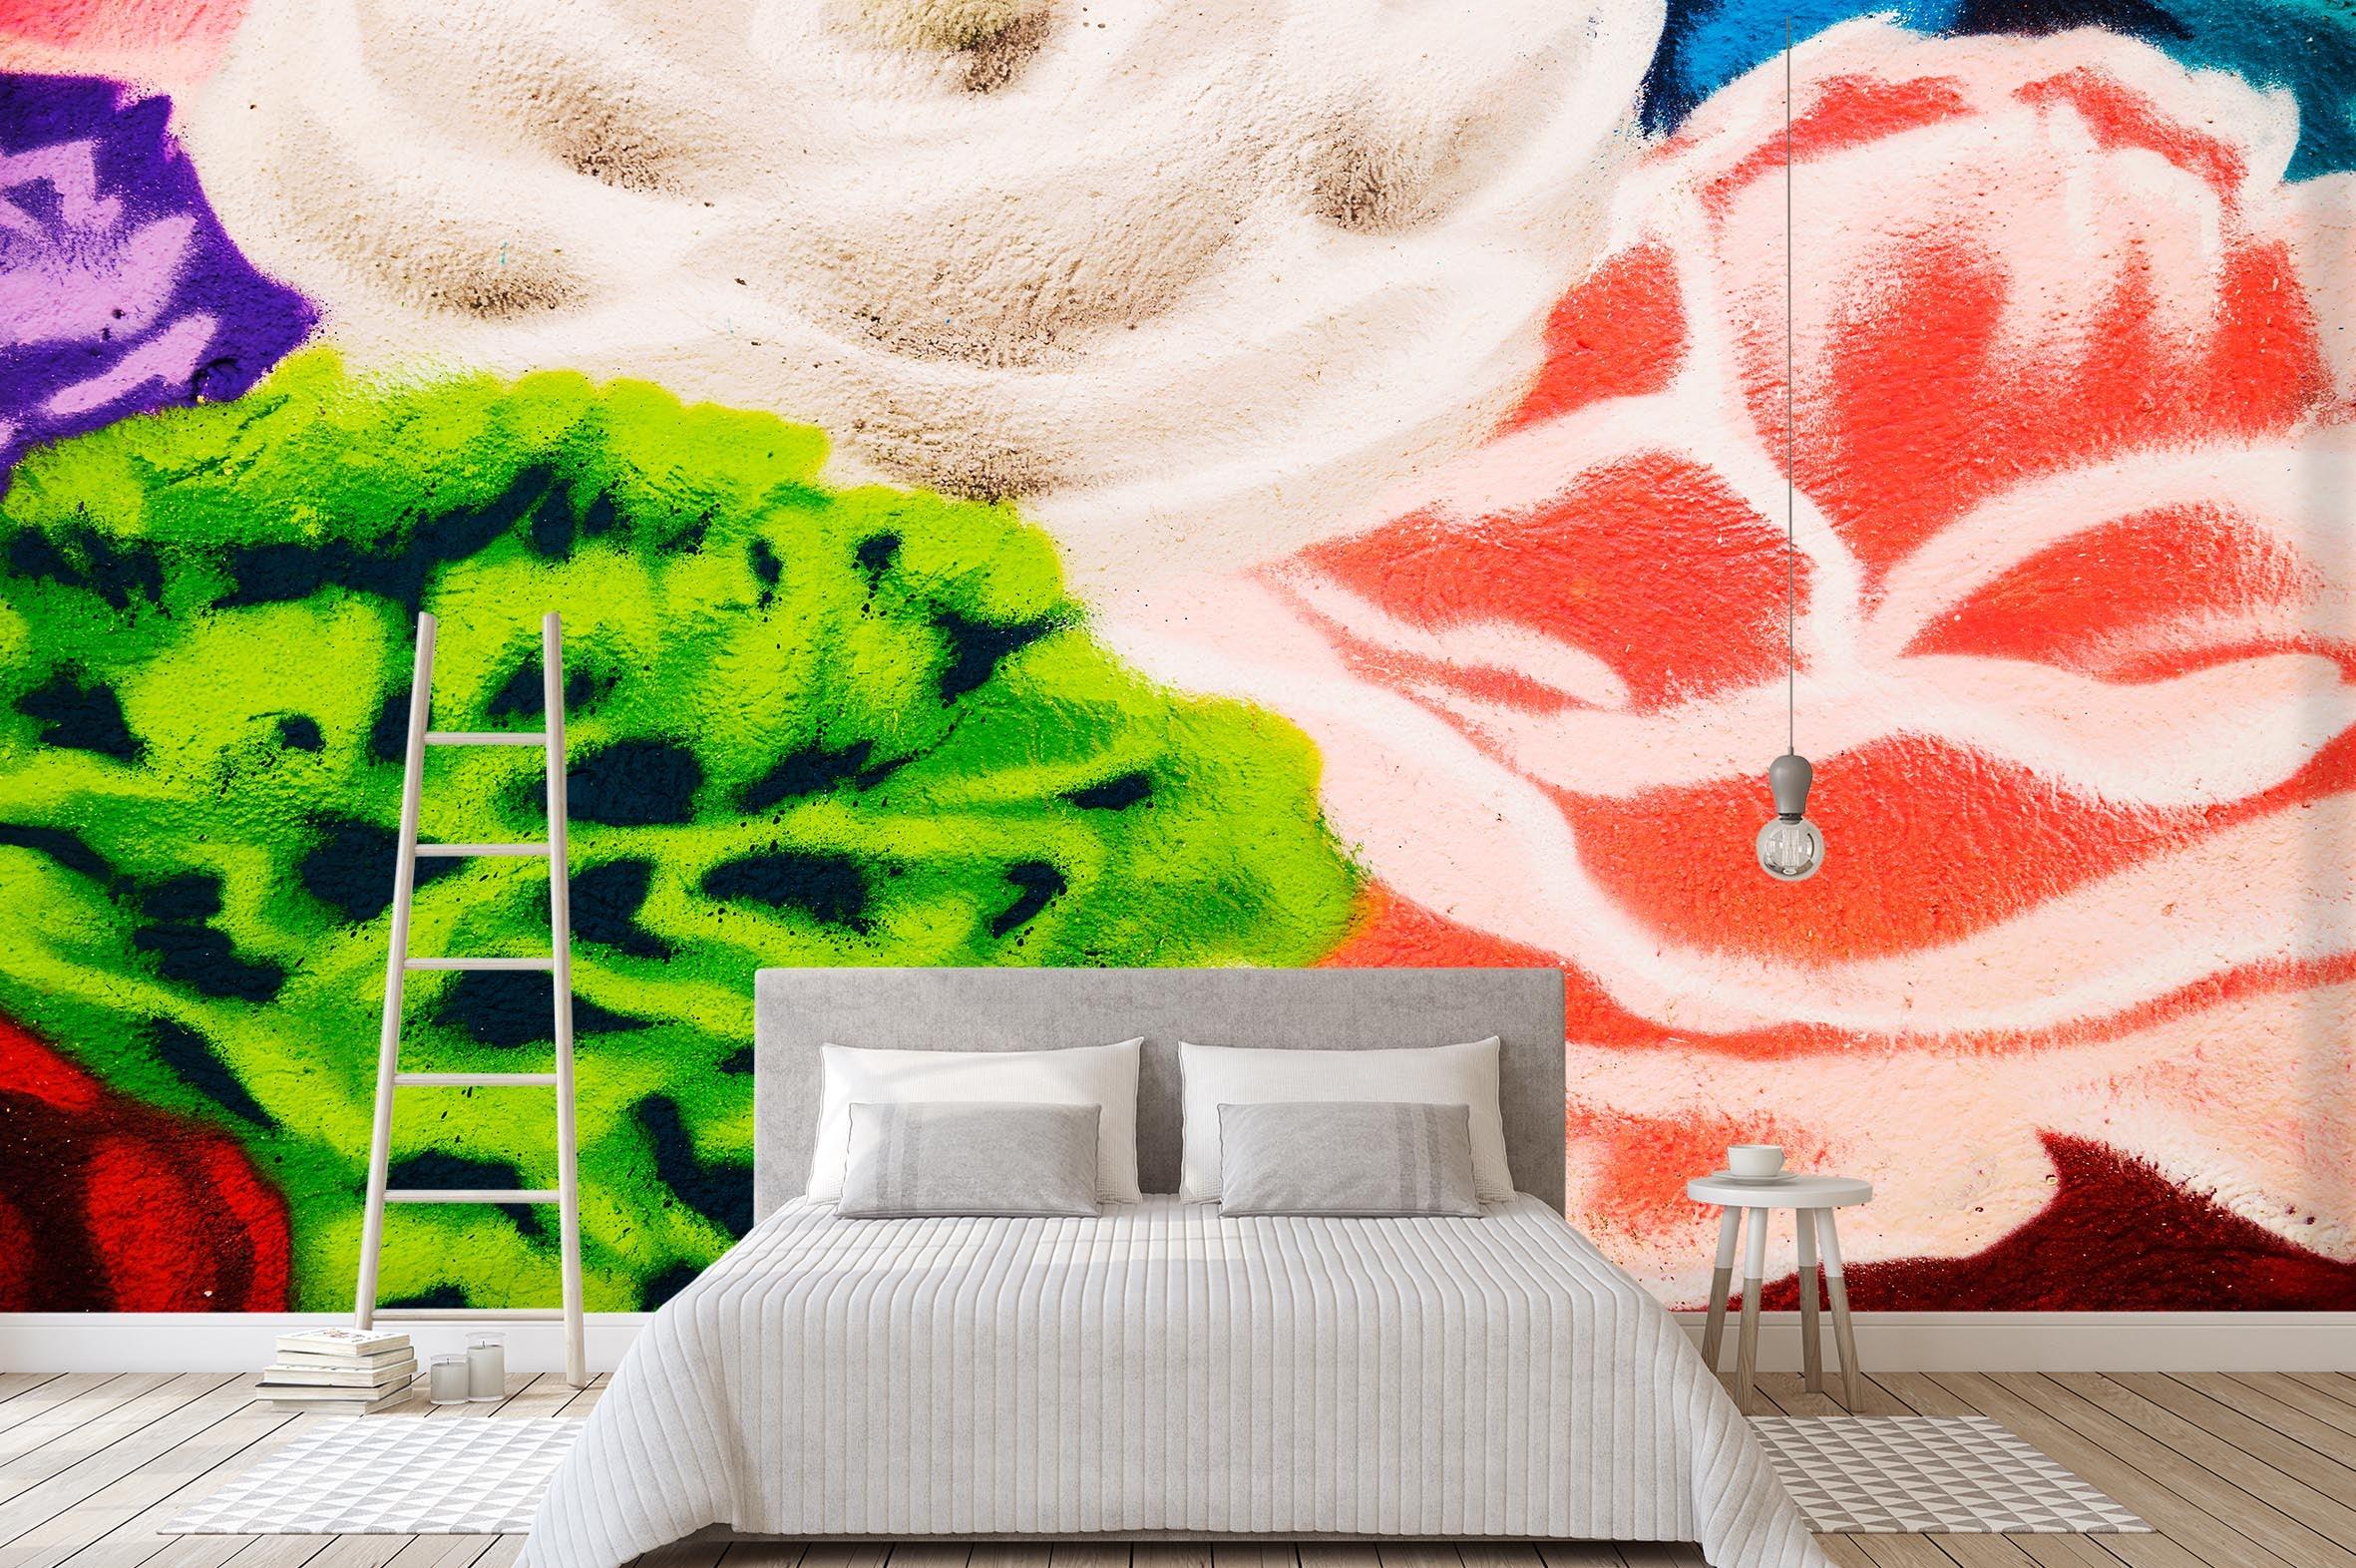 3D Blurry Colorful Floral Wall Mural Wallpaper 57- Jess Art Decoration